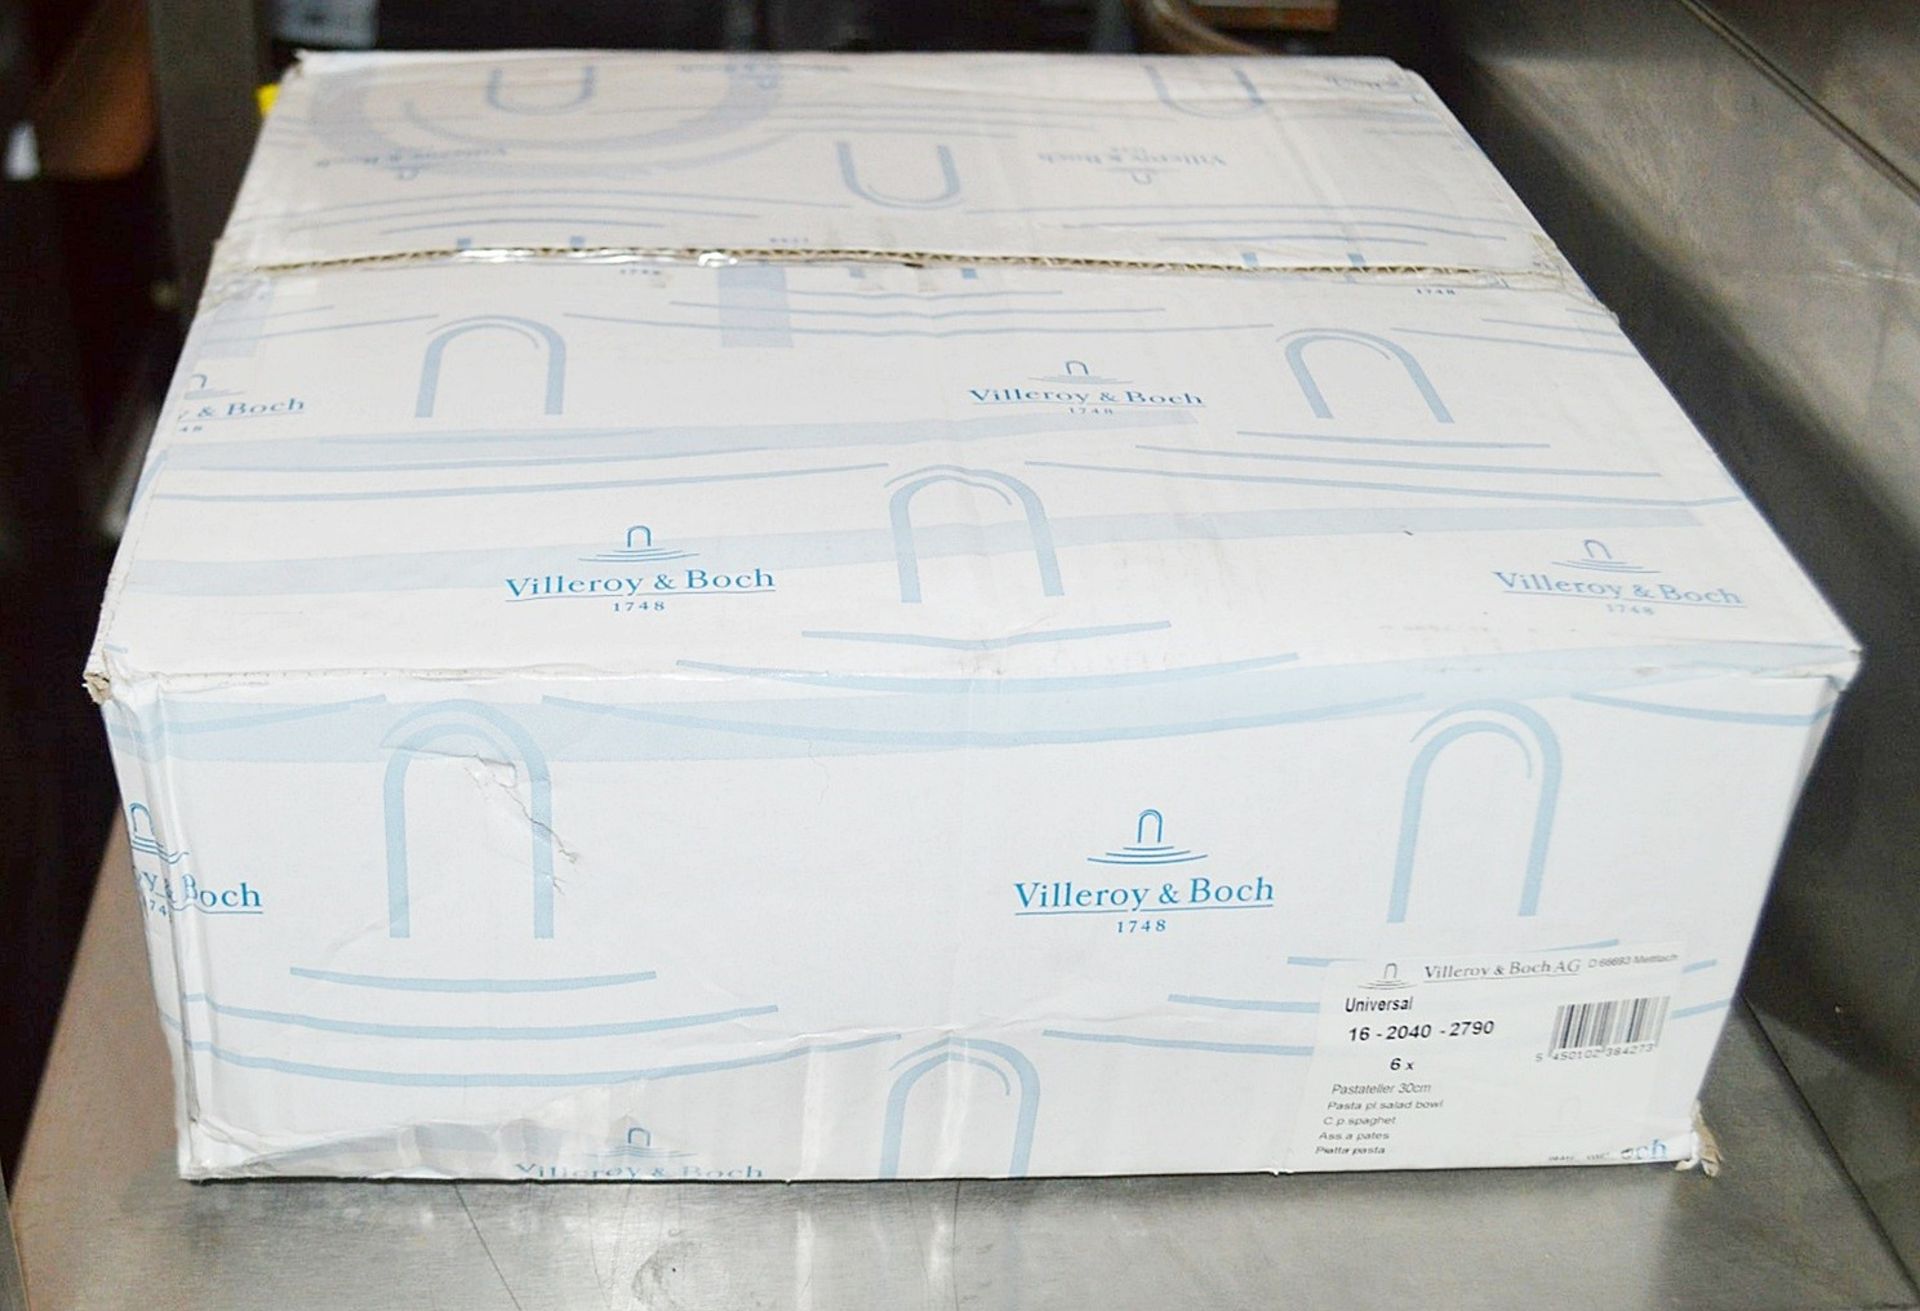 12 x Villeroy & Boch 30cm Pasta Bowels - New/Unused Boxed Stock - Image 2 of 7